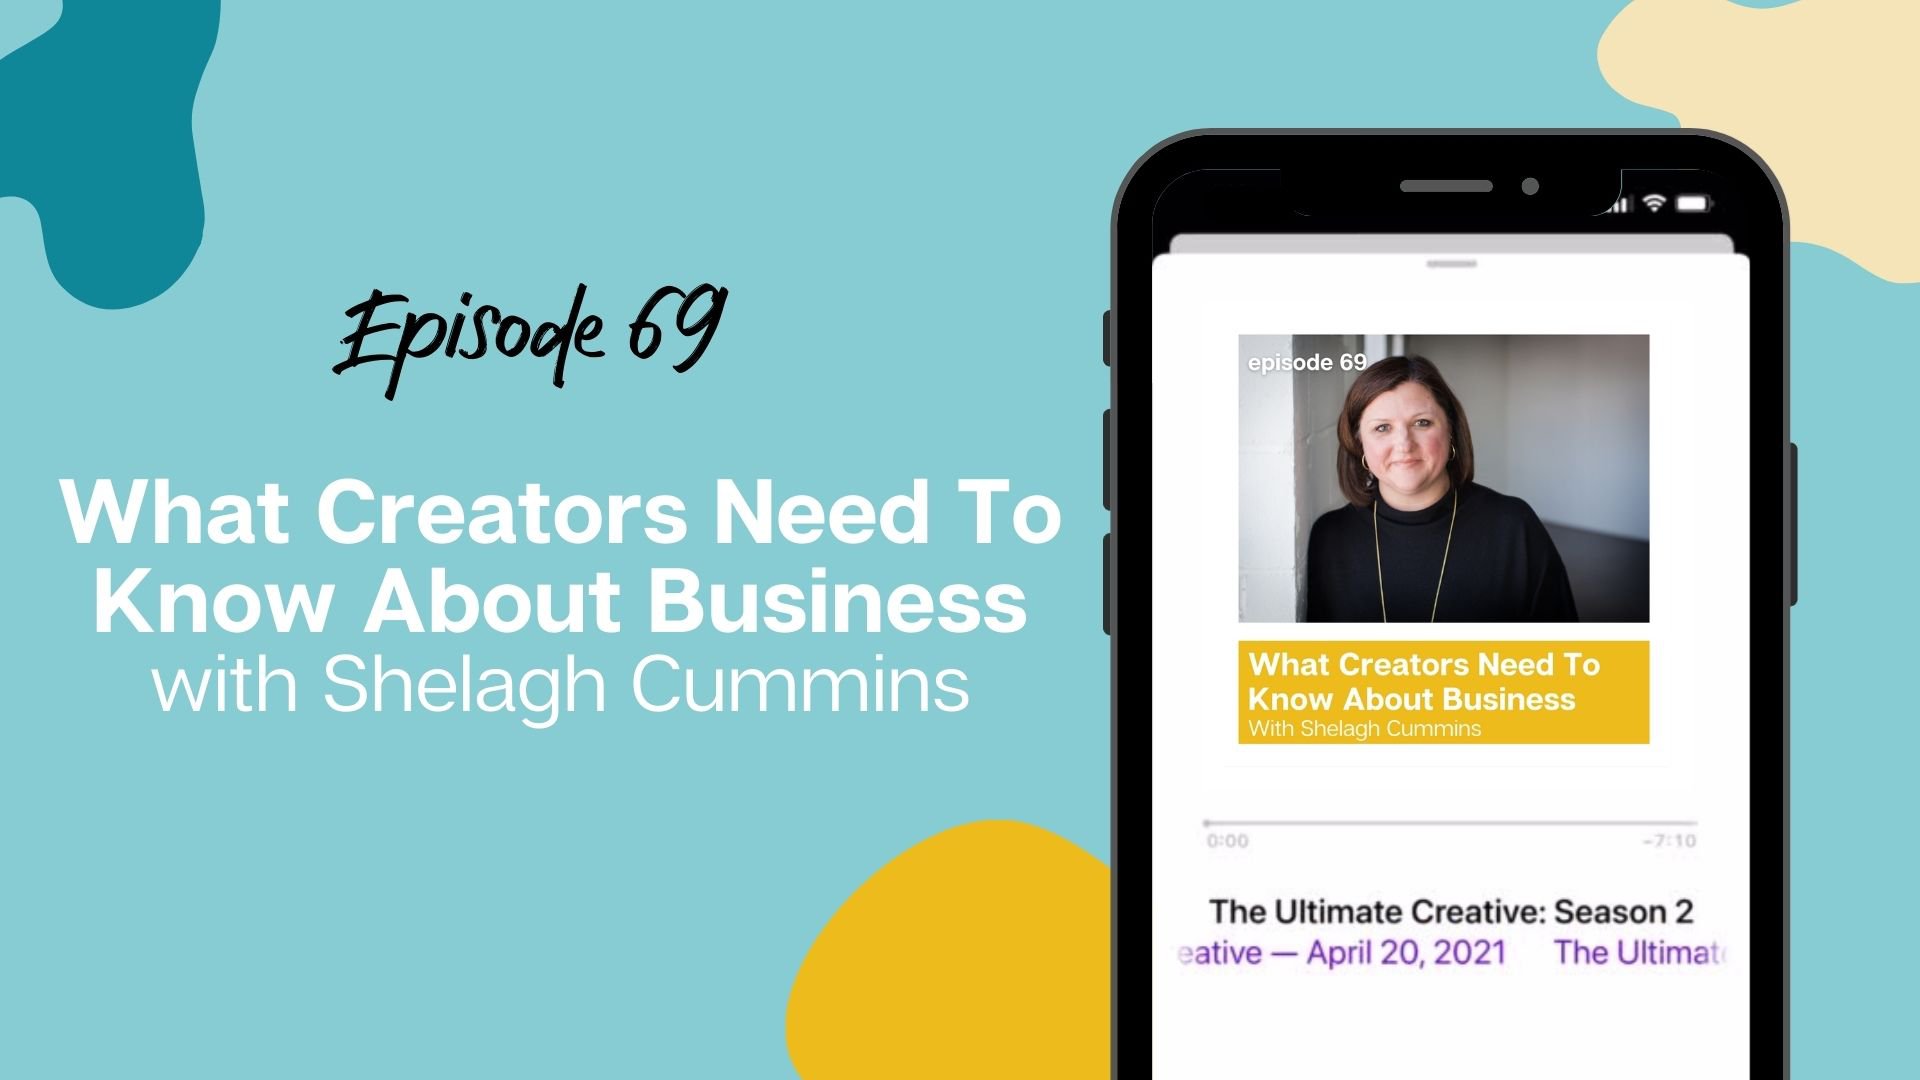 What Creators Need To Know About Business Featured Image